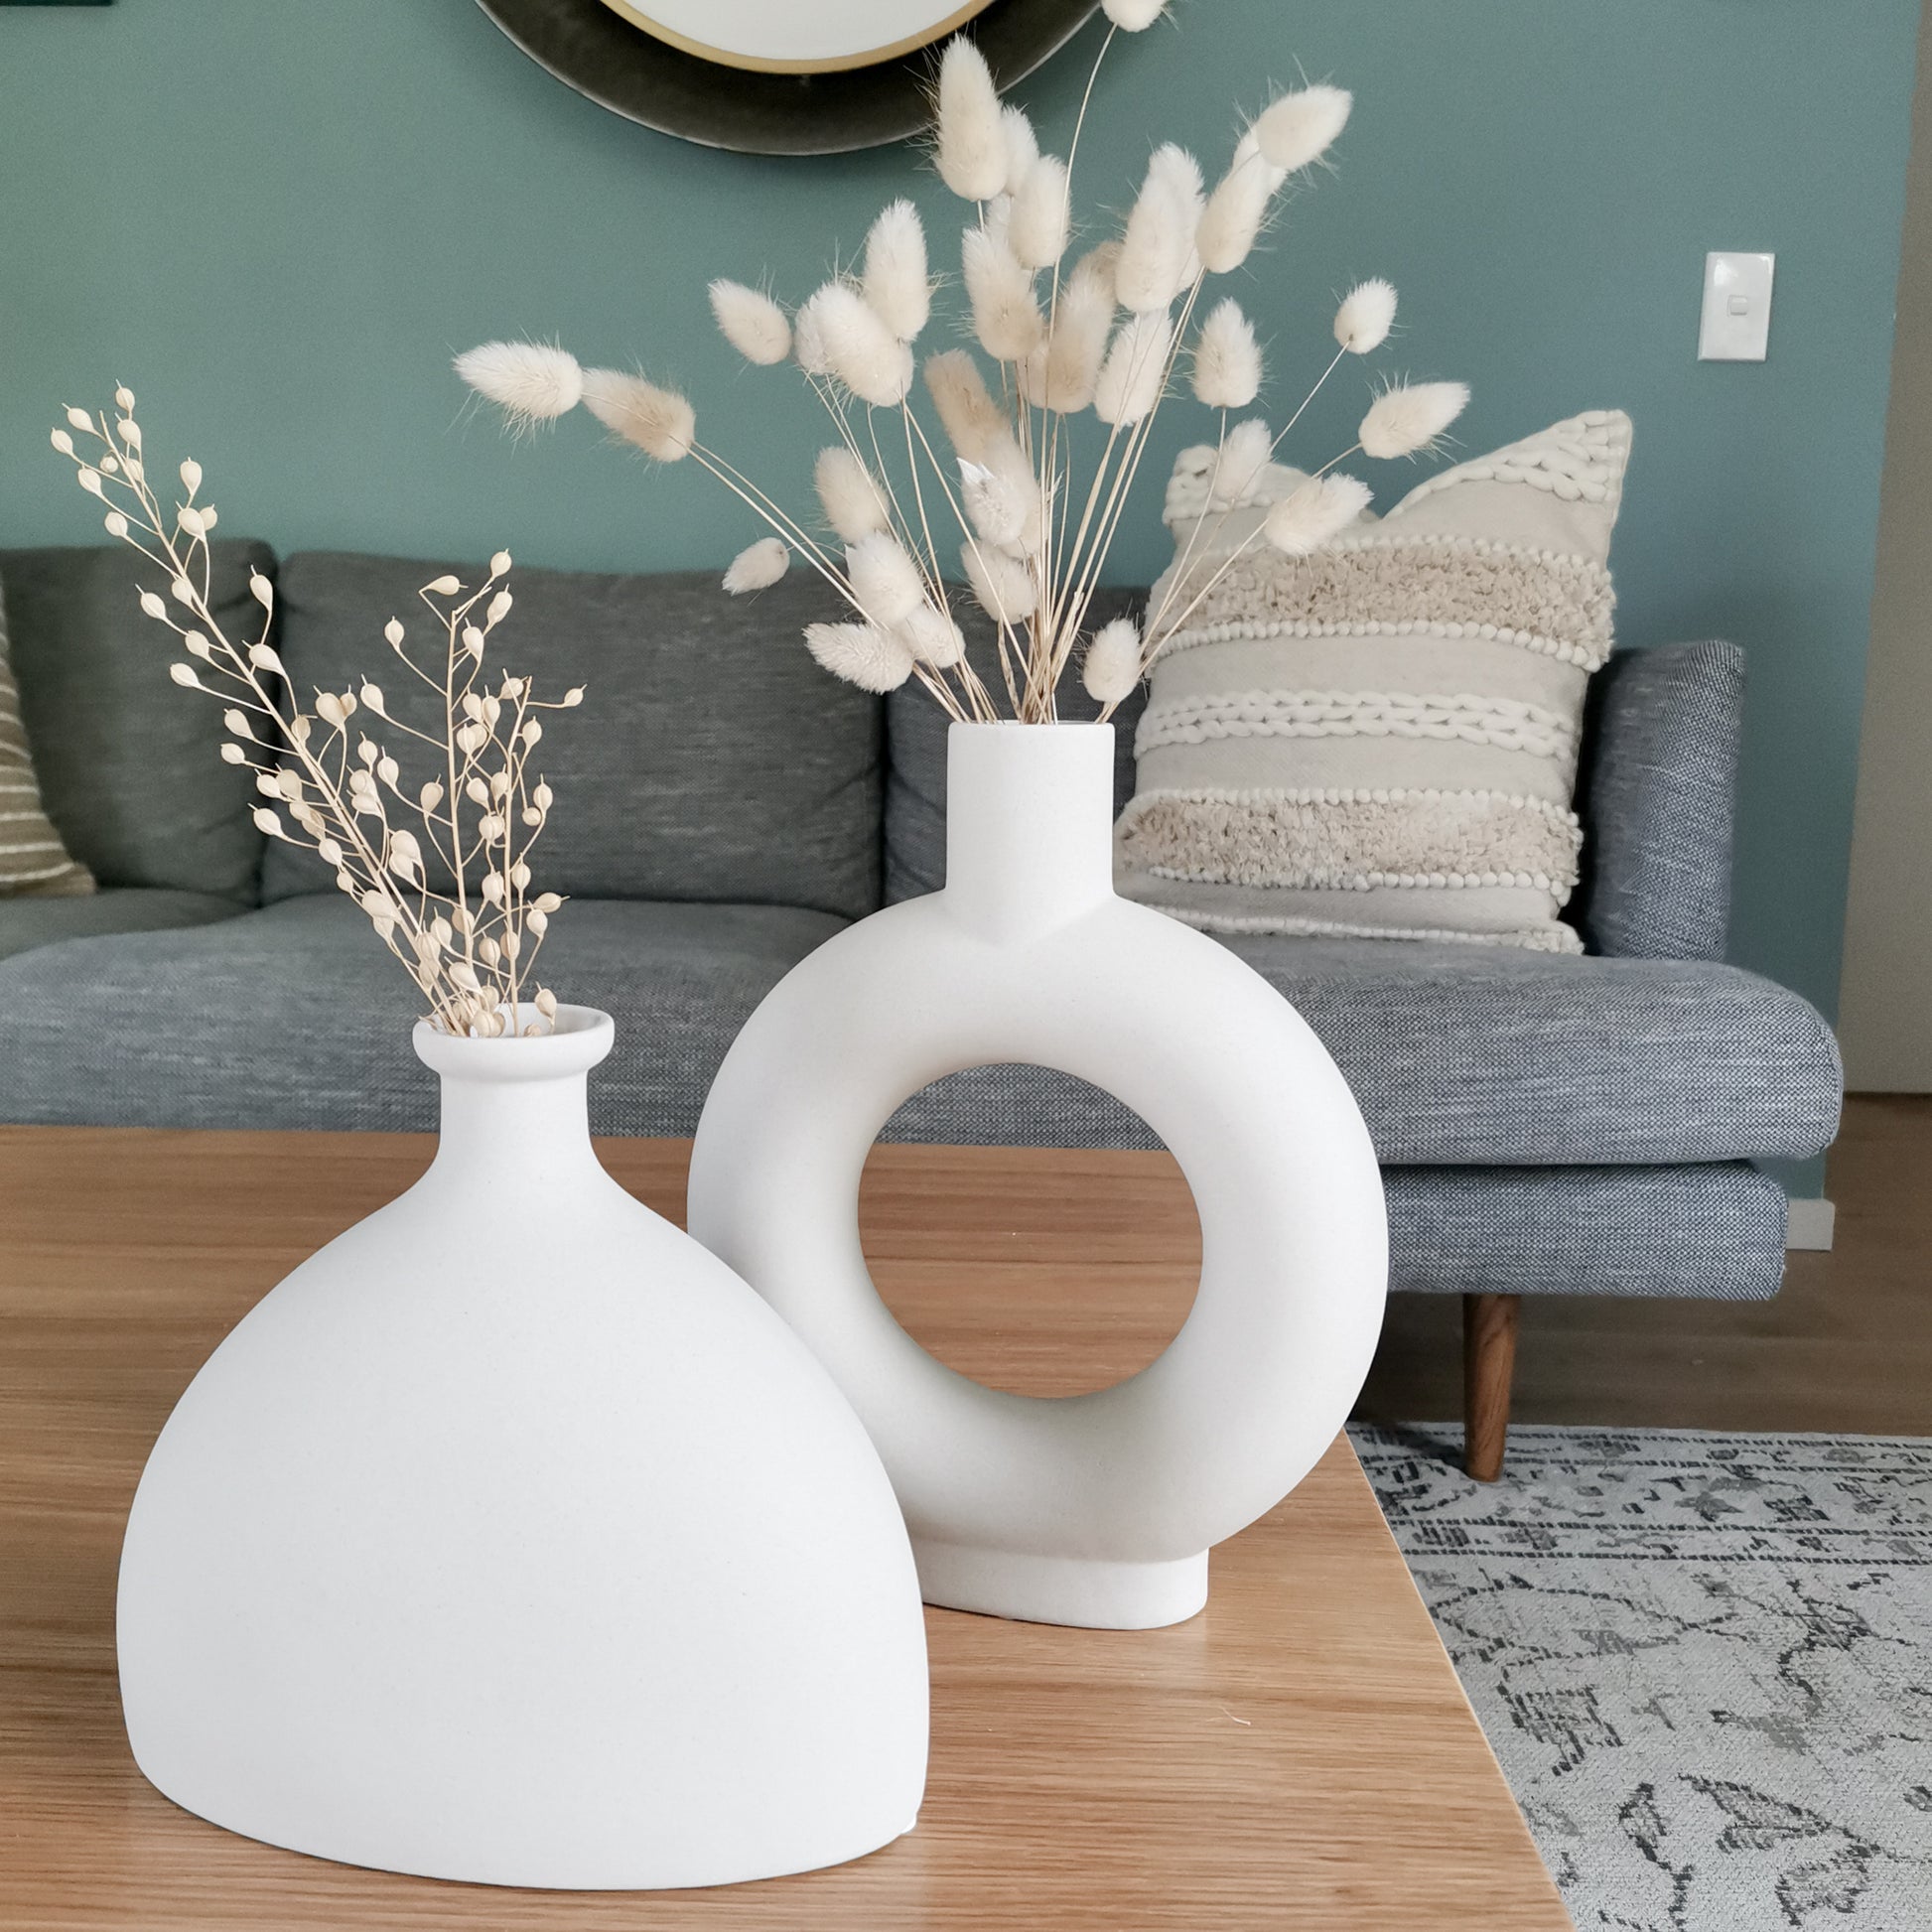 Scandi-chic vases with pampas grass as living room decor 